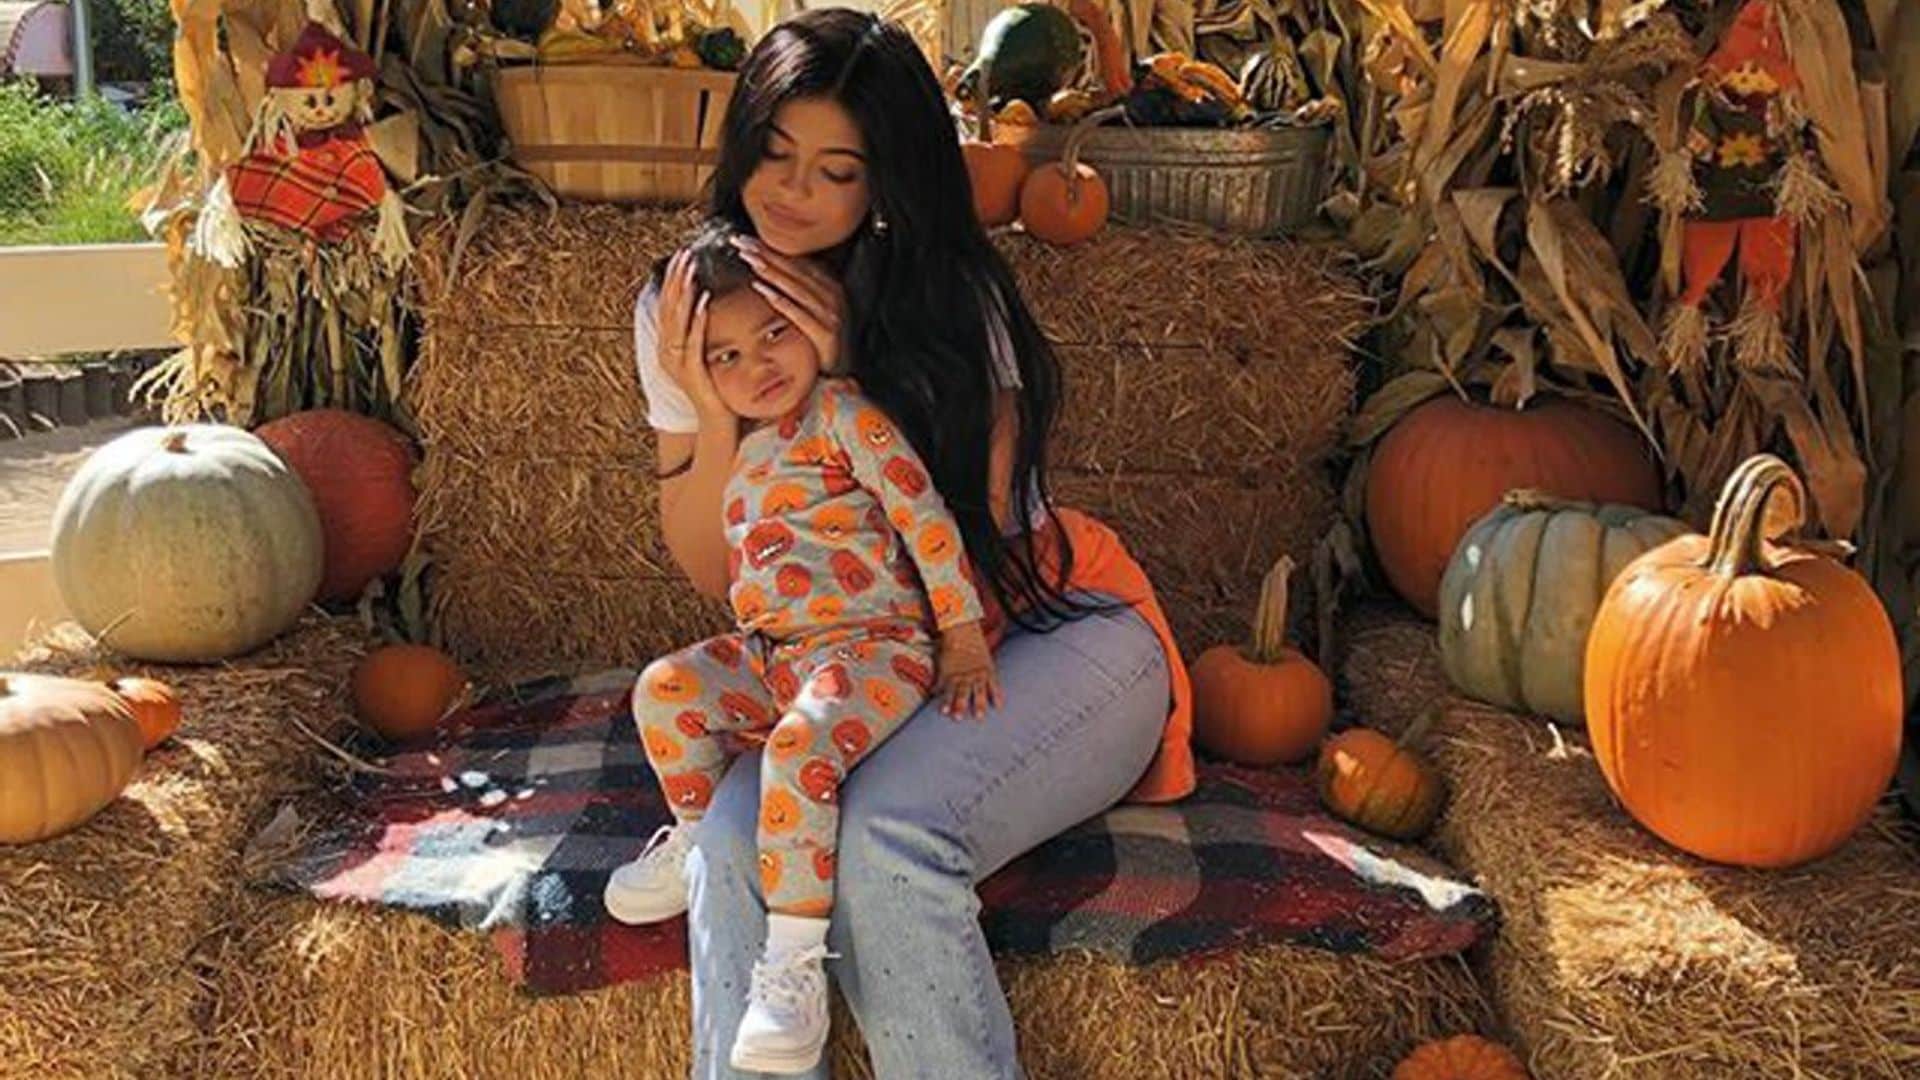 Get ready for Halloween like Kylie Jenner and Stormi with these cute kids' clothes